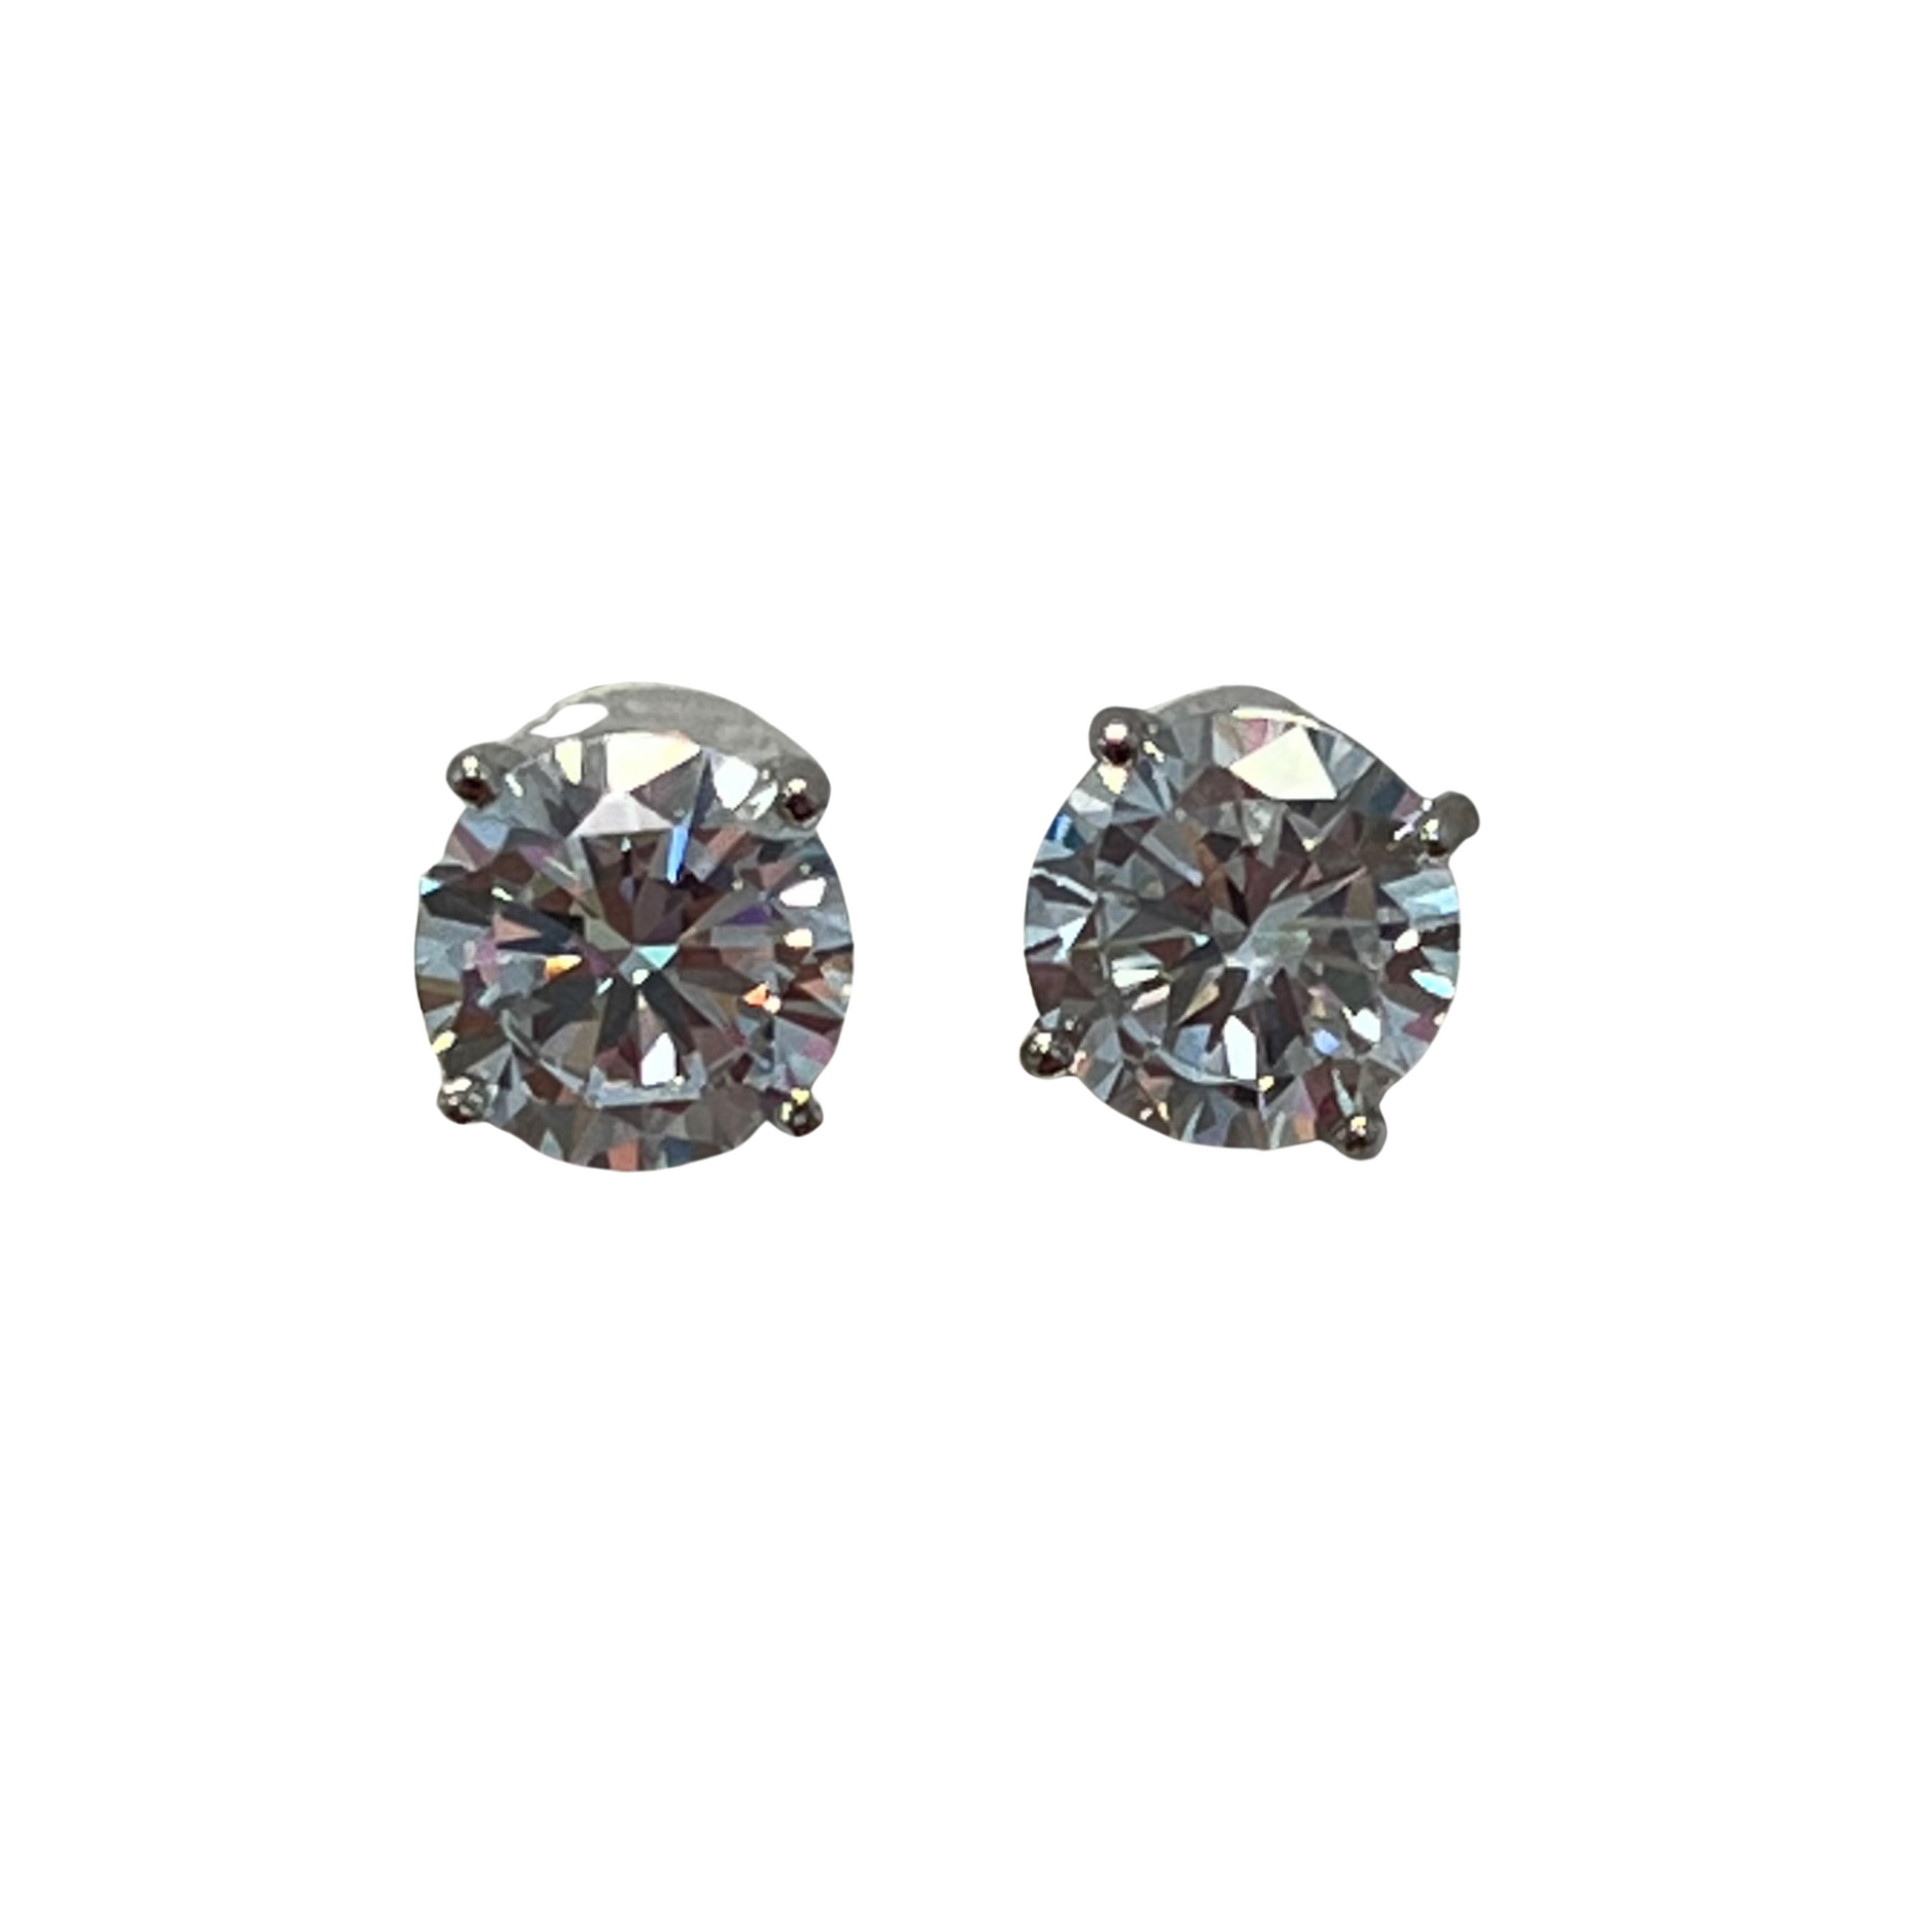 These Large Cubic Zirconia Studs are perfect for adding a luxurious, sparkly accent to any look. Crafted with top-grade cubic zirconia, each earring provides a glamorous shine with maximum durability. For glamour that lasts, these earrings are a must-have.